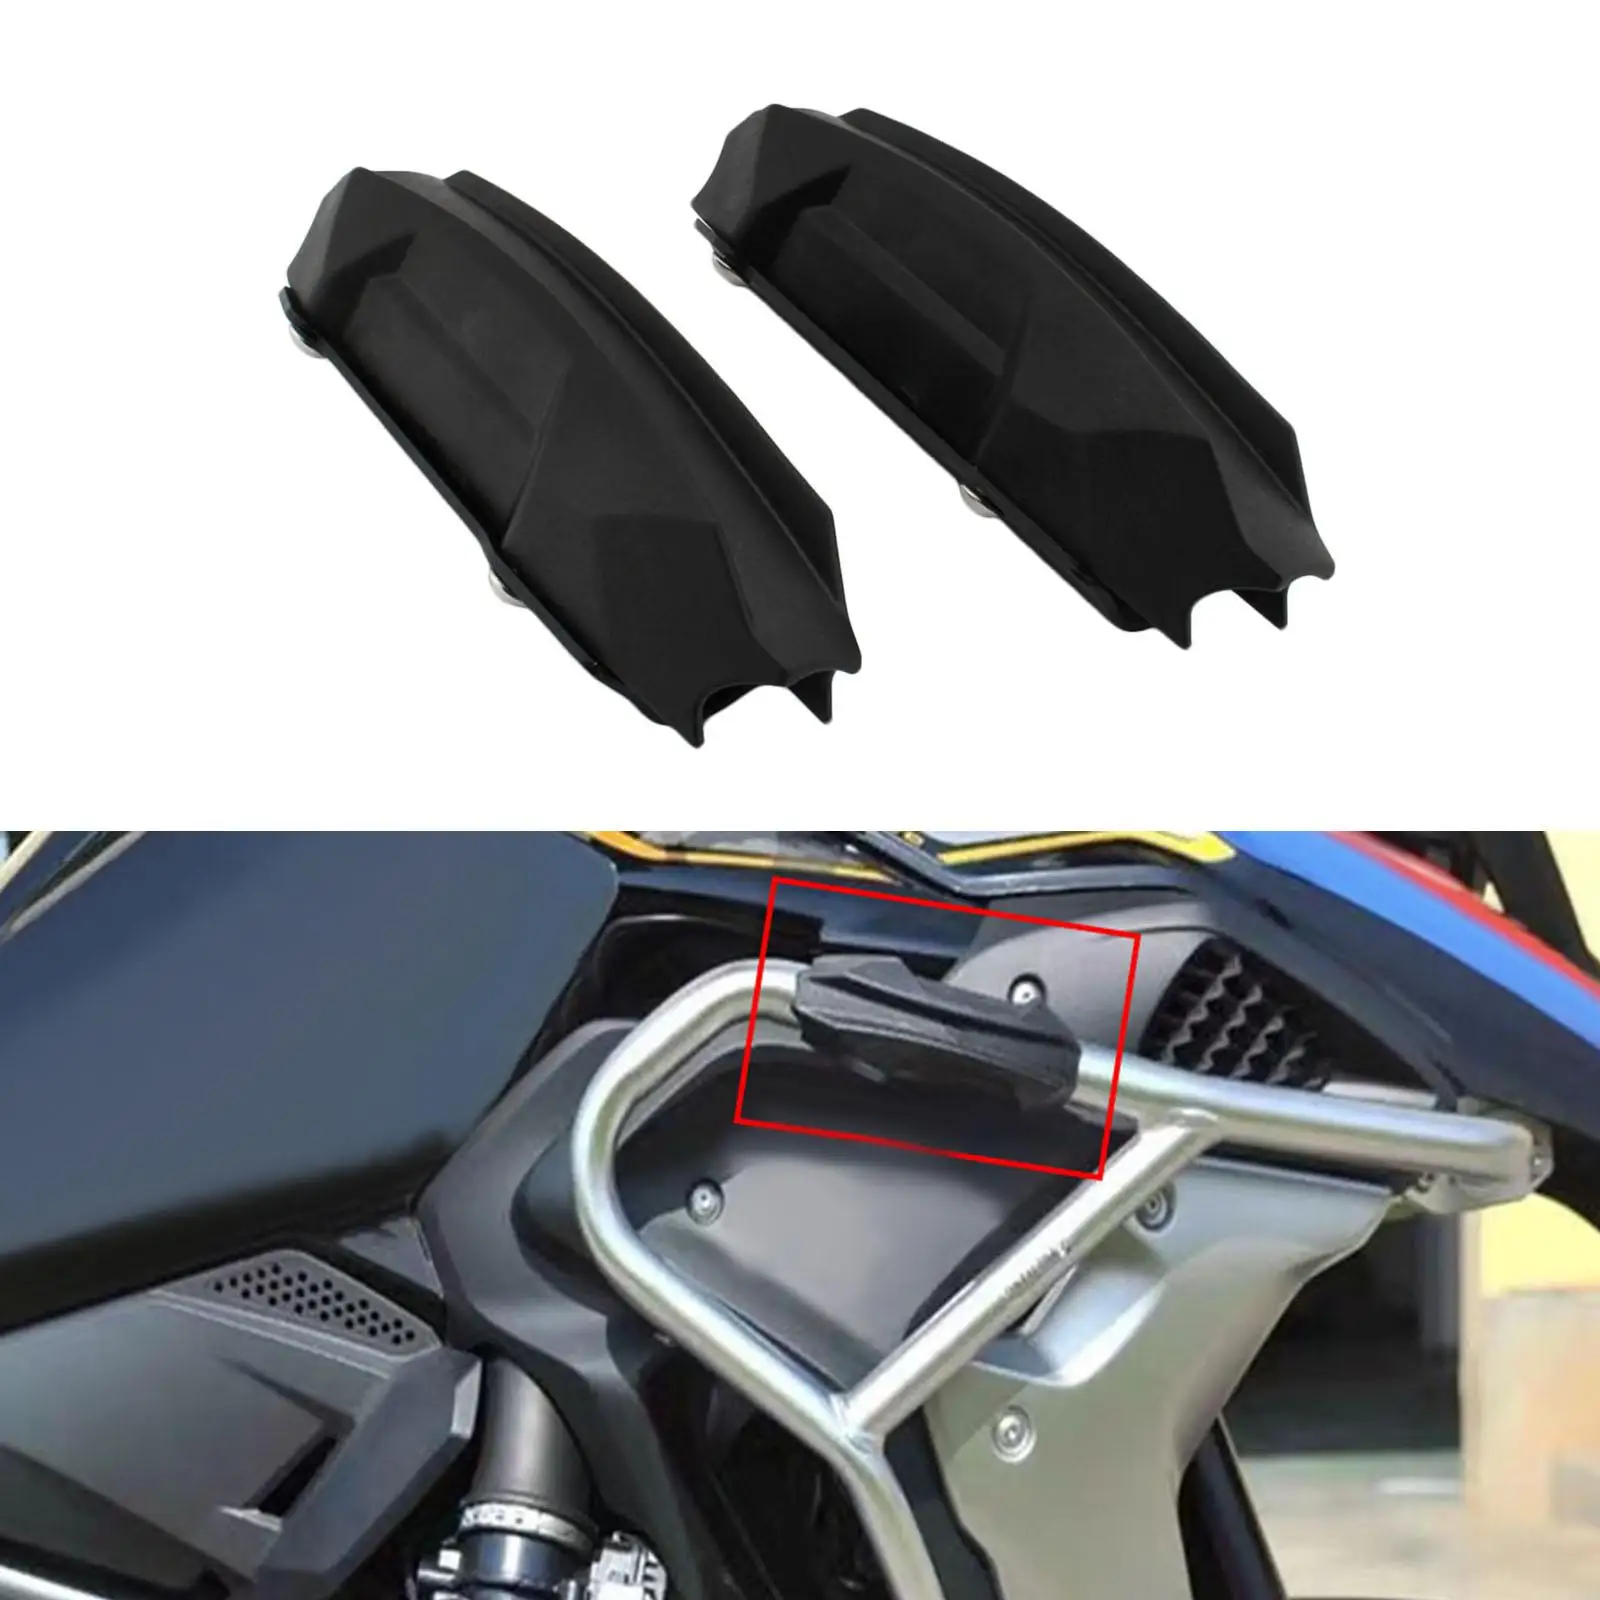  Motorcycle Engine Guard Bumper Engine Guard Replacement  Protective Cover for  R1250GS  F800GS F850GS Series